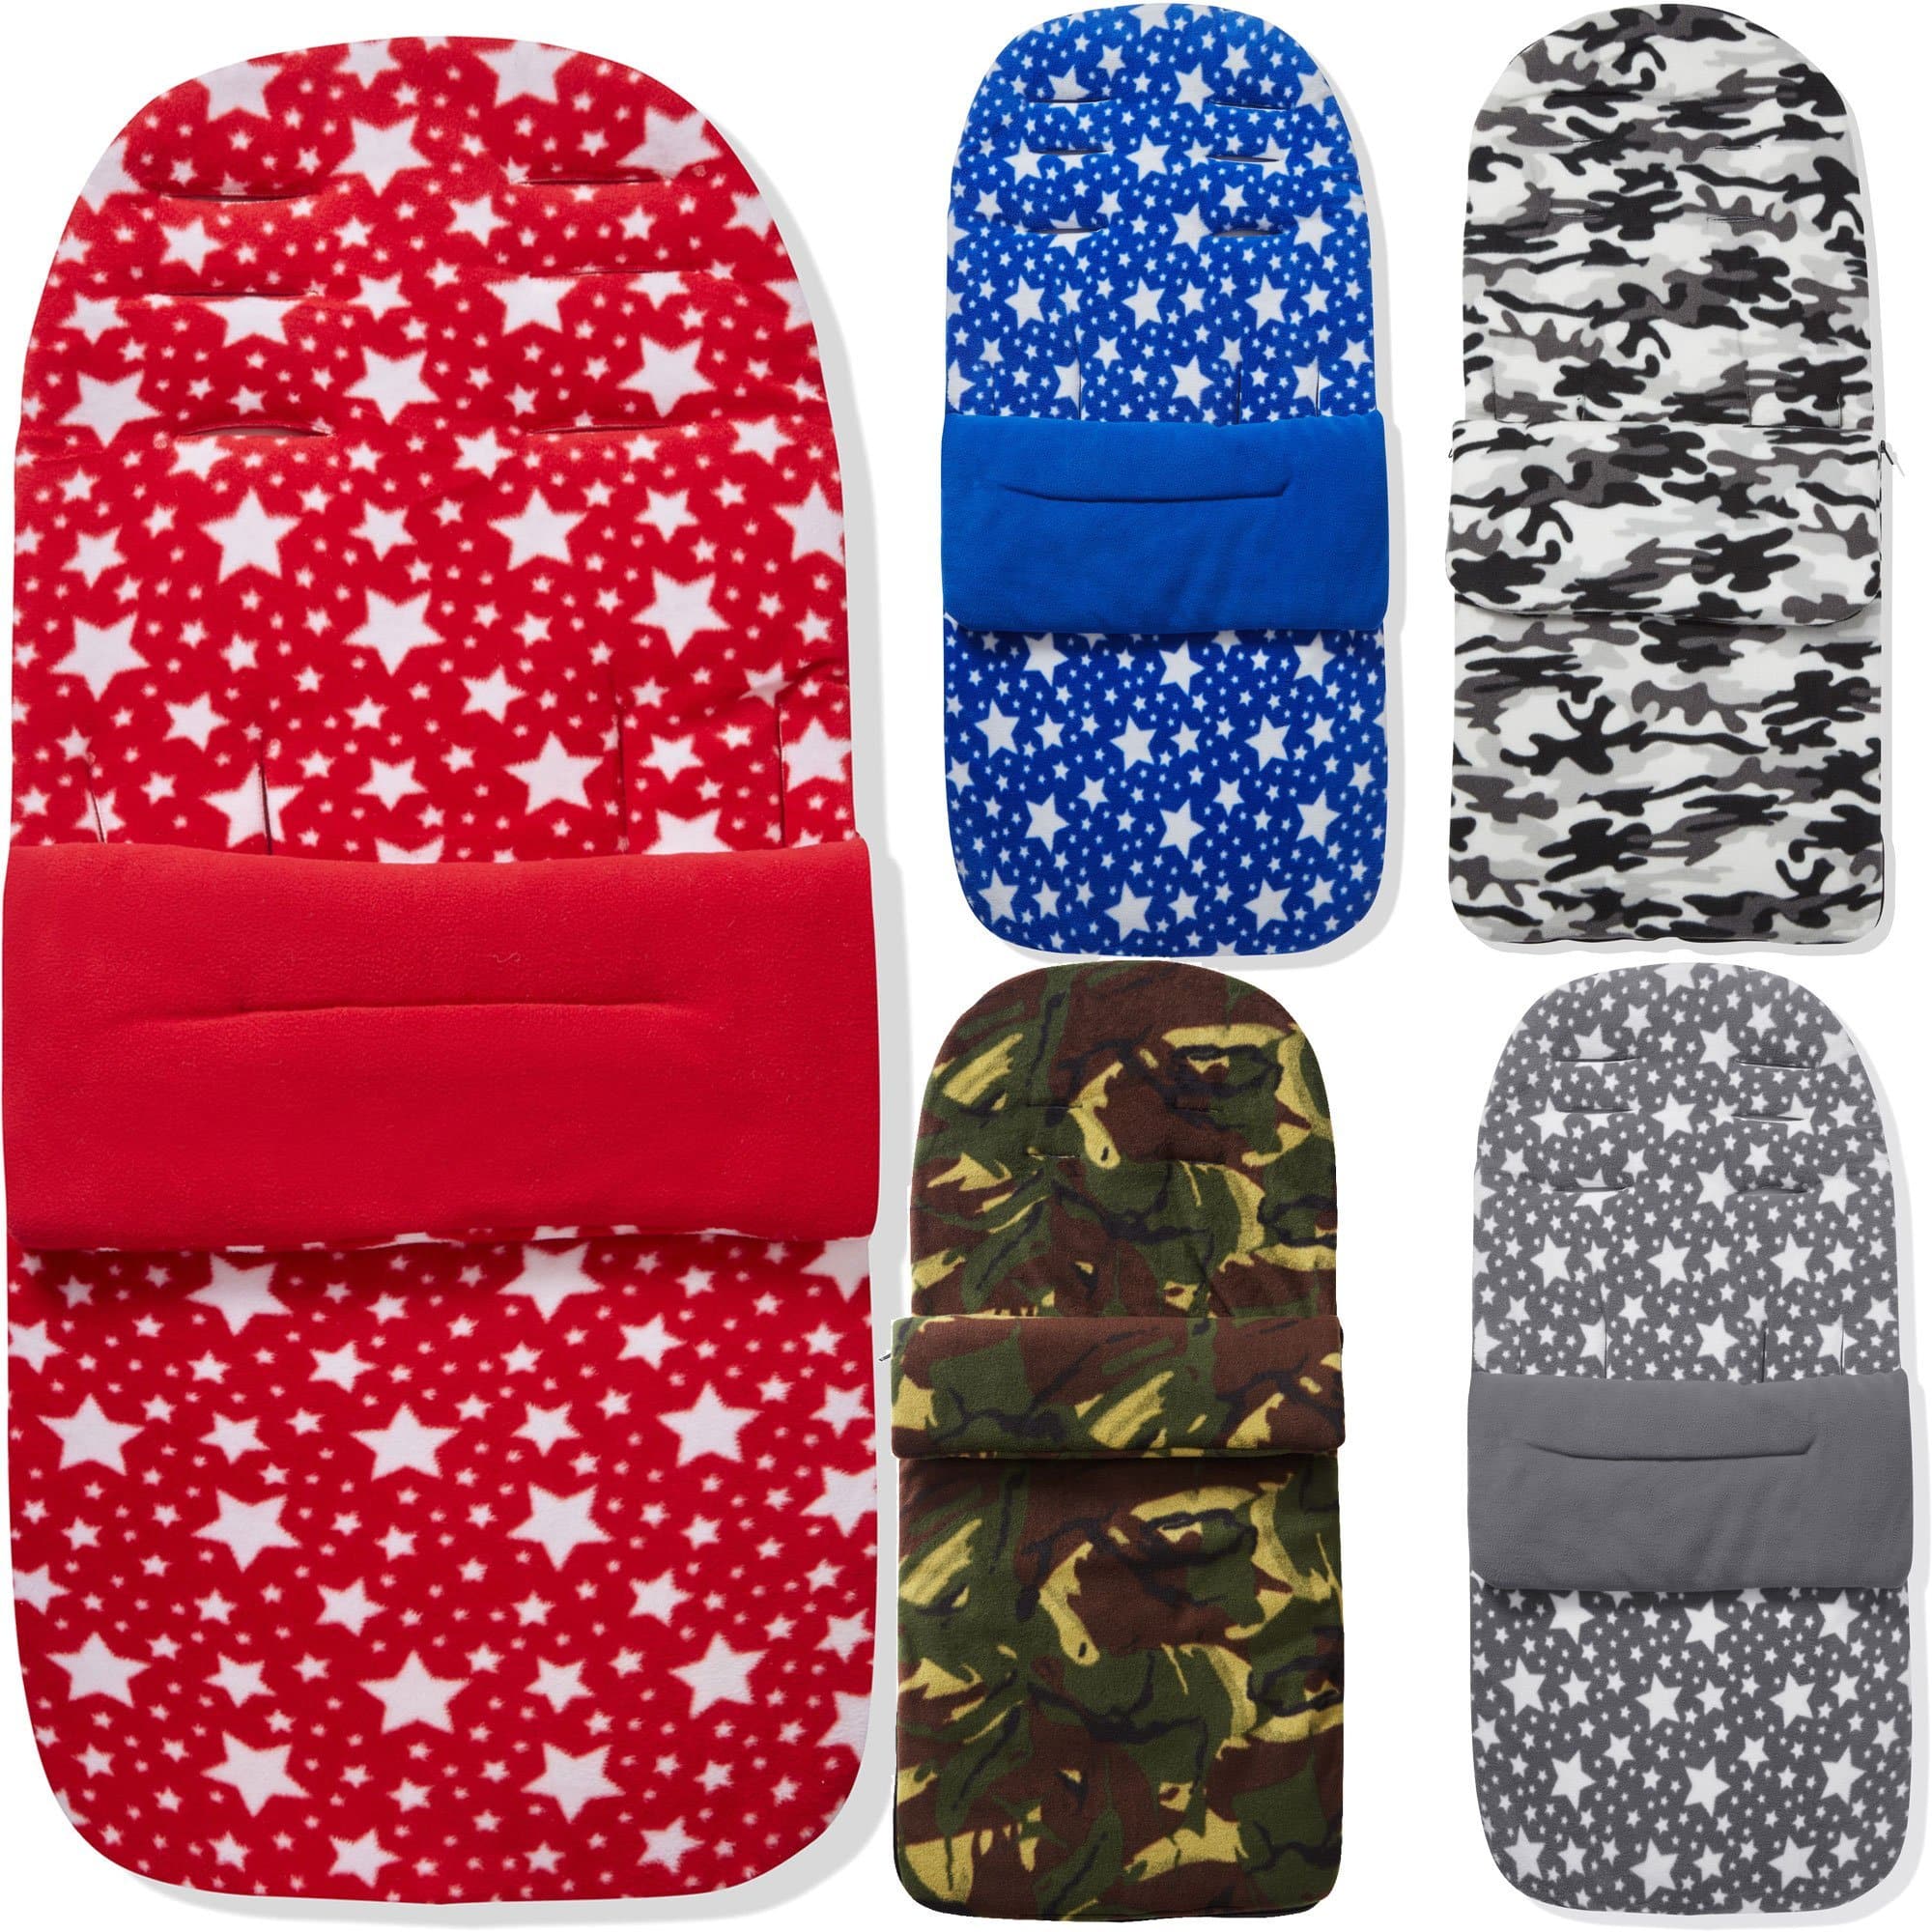 Fleece Footmuff / Cosy Toes Compatible with Gesslein -  | For Your Little One